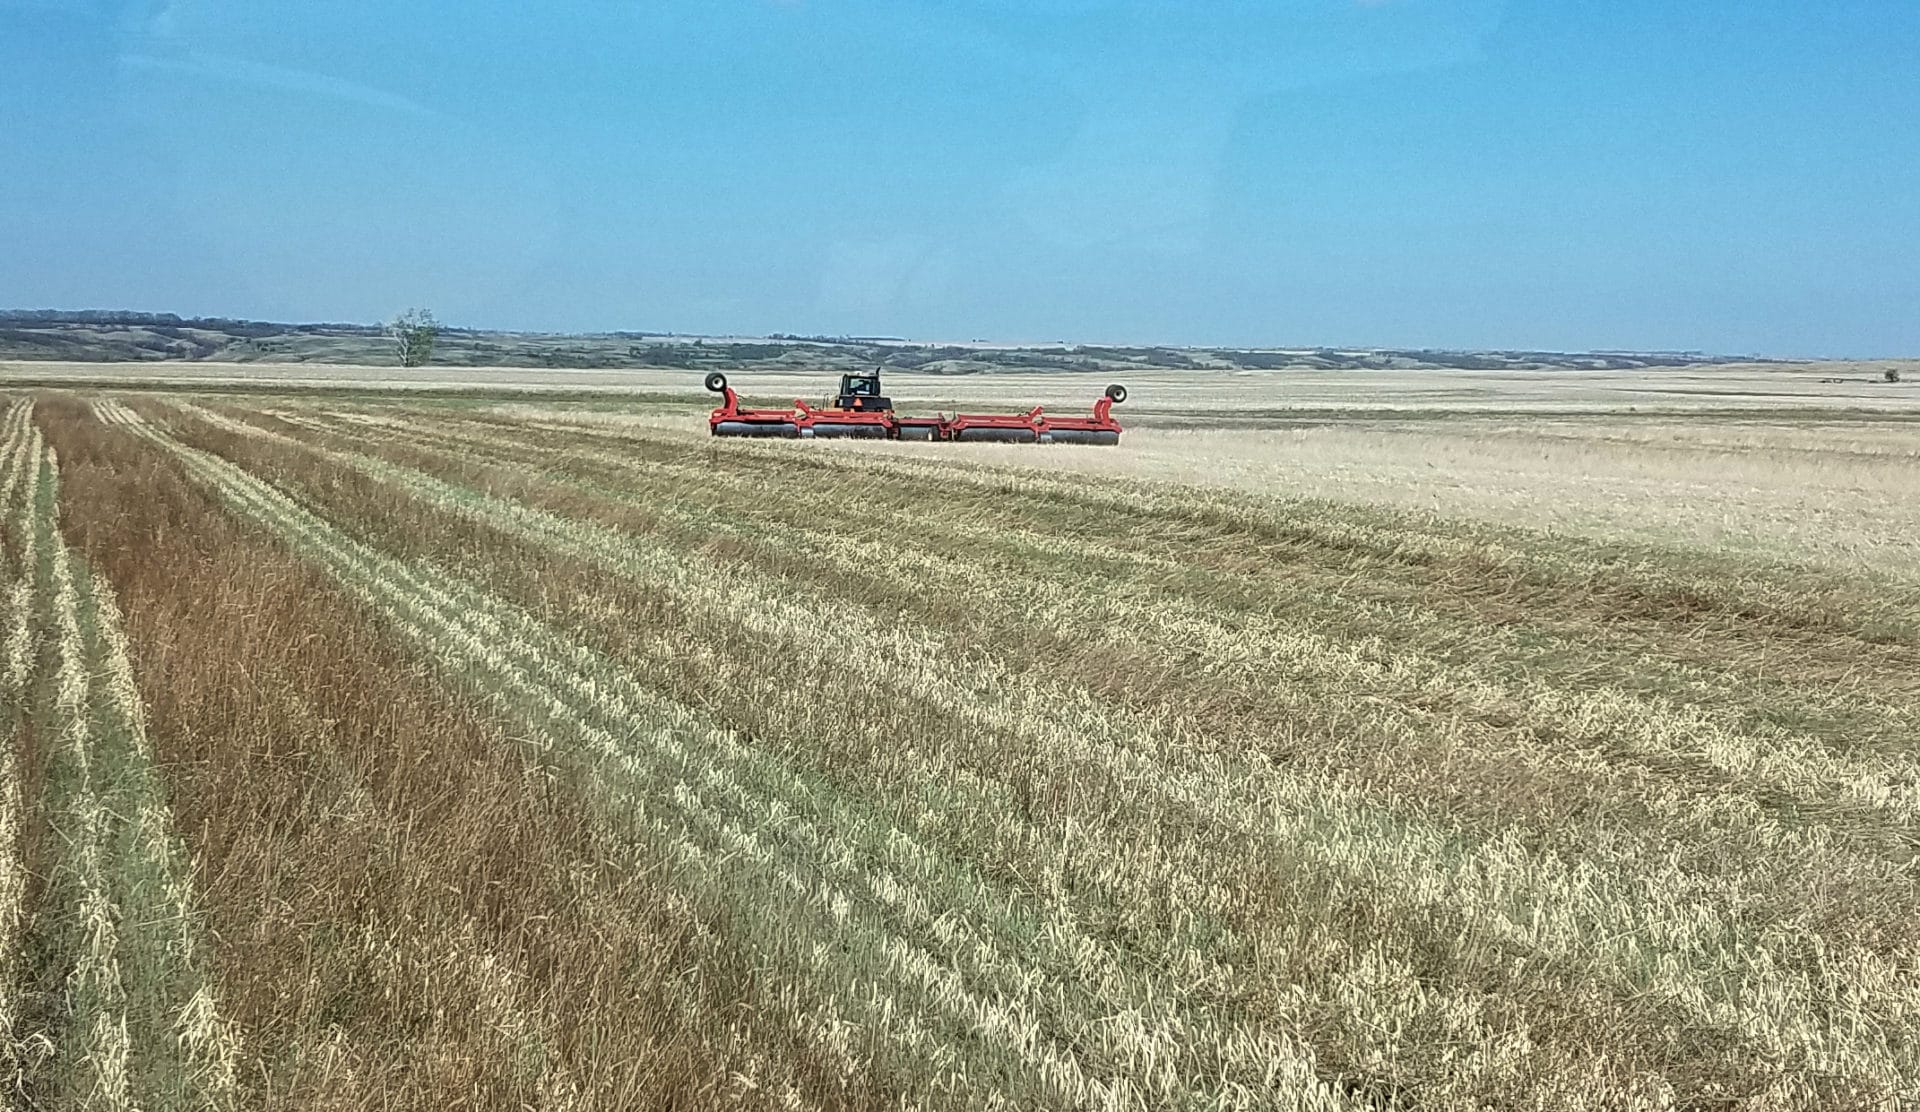 “Planting soybeans and rolling down previous years cereal rye stubble. It was 85 degrees with a 30-40mph wind this day, but no soil blowing.  Barley, sweet clover, radish cover is also present from the past fall.  The green residue was volunteer rye that overwintered providing a living root all spring.” 
– Brandon Bock